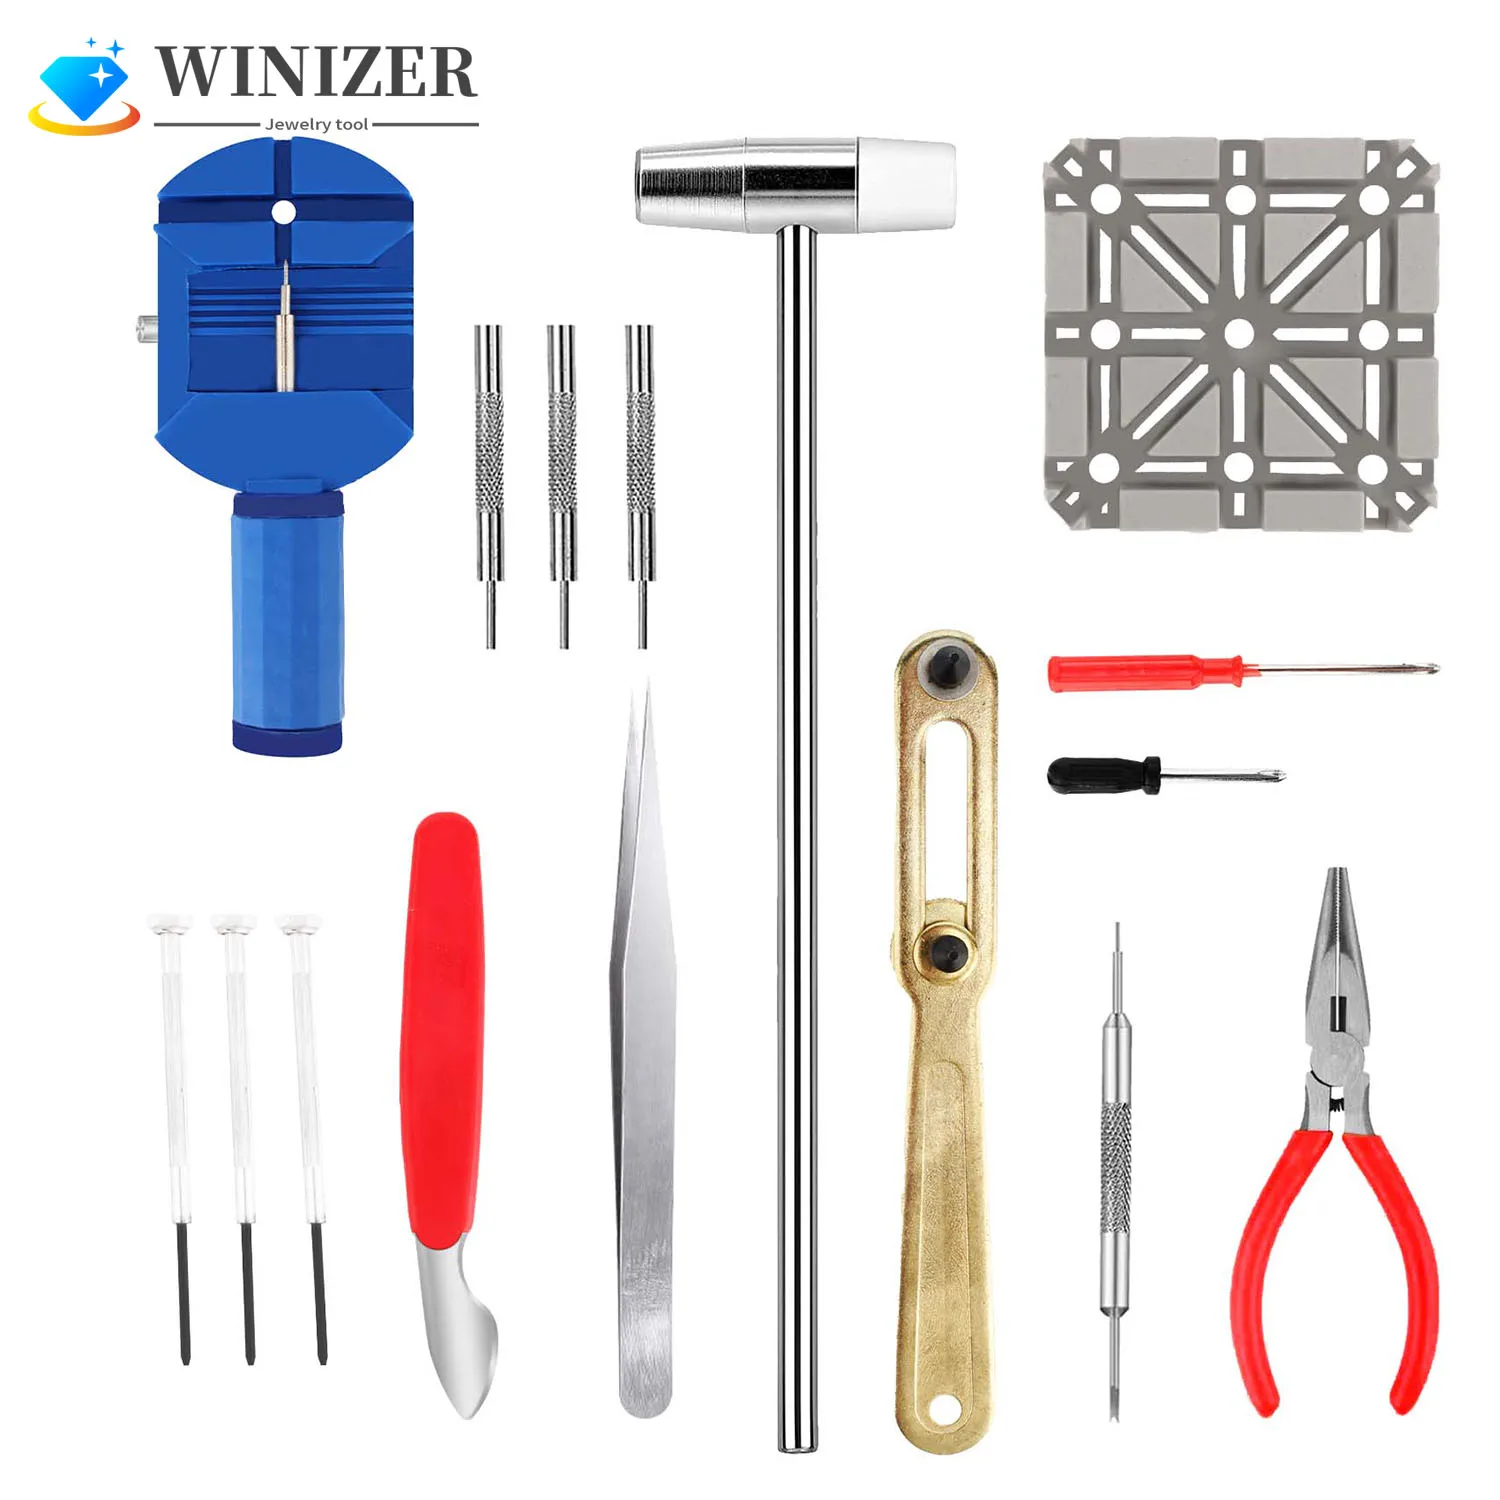 16-Piece Watch Repair Tool Set with Durable and Cost-Effective Watch Disassembly, Maintenance and Battery Replacement Tools